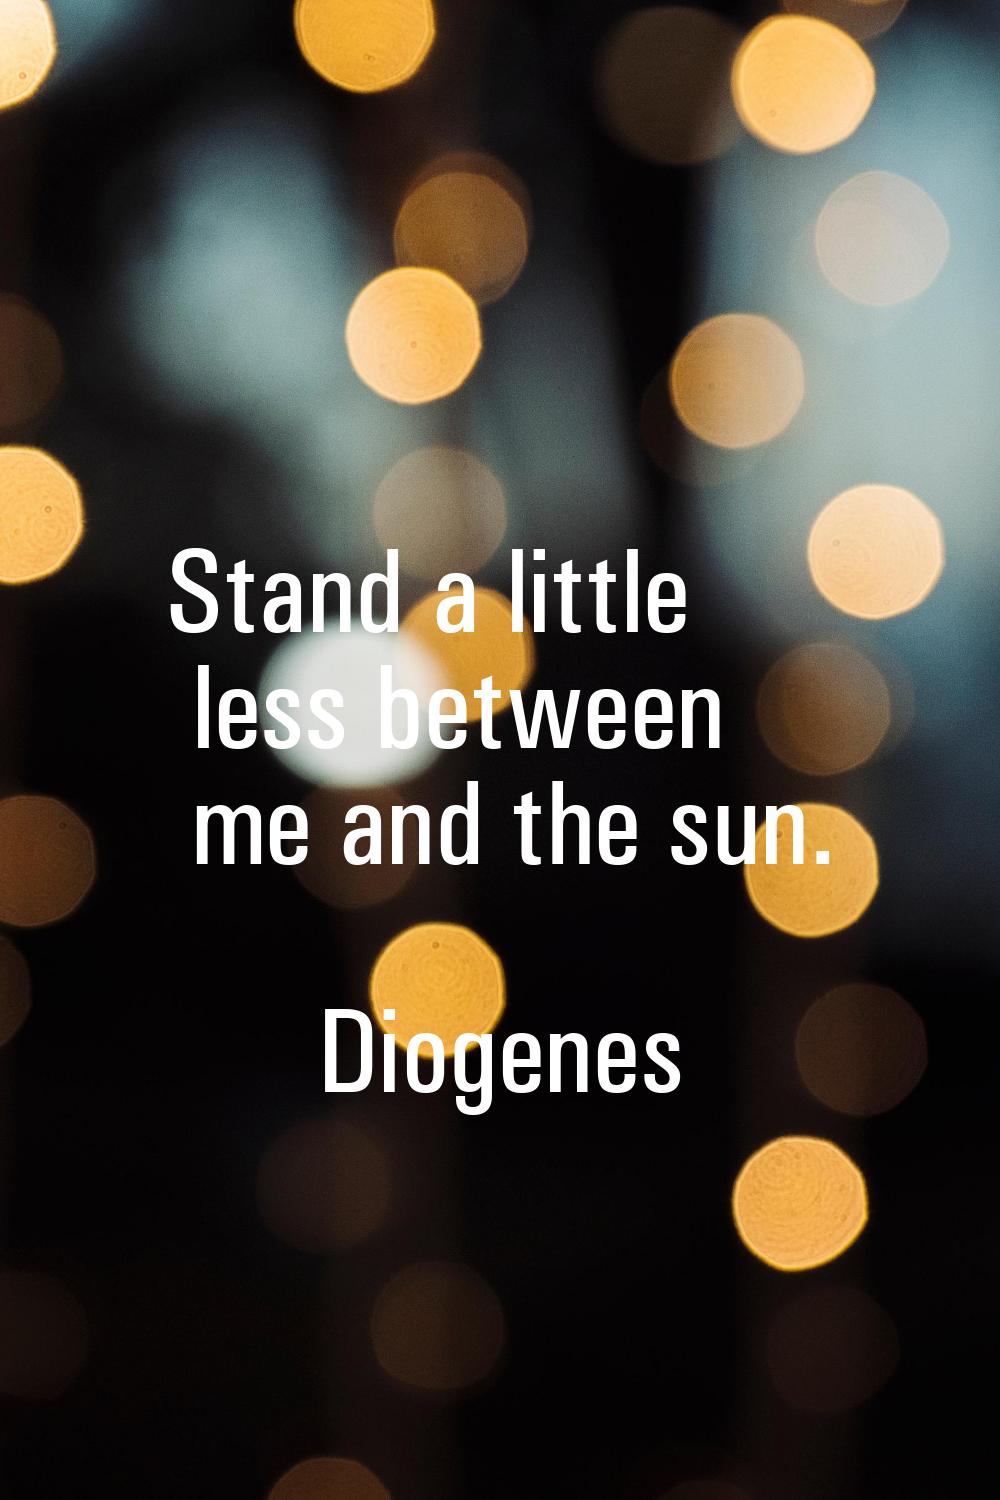 Stand a little less between me and the sun.